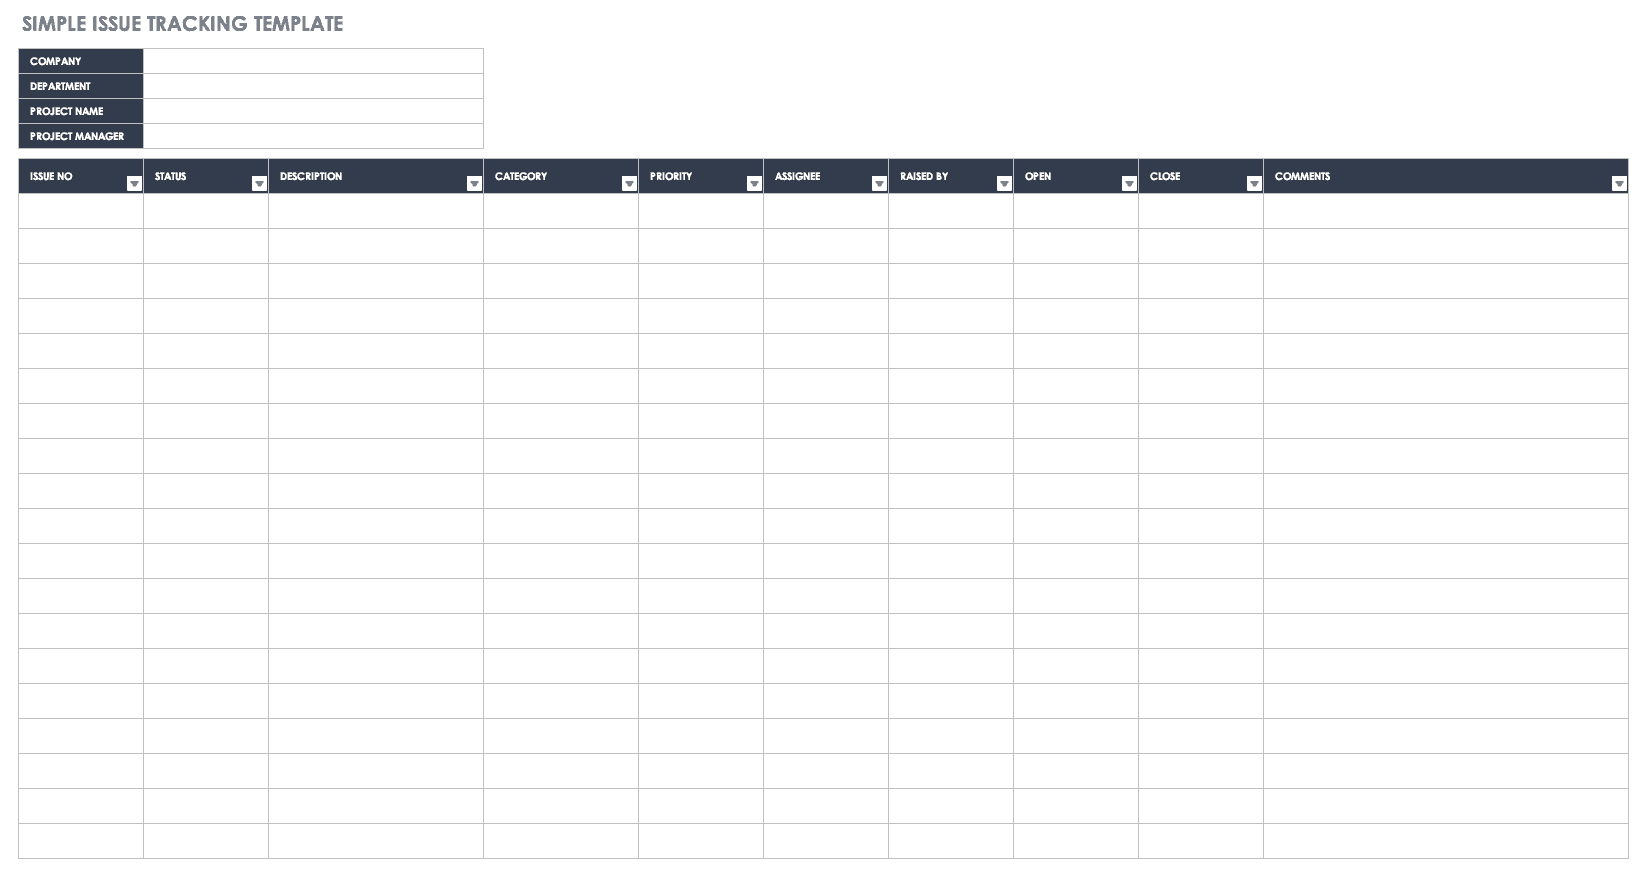 Simple Issue Tracking Template